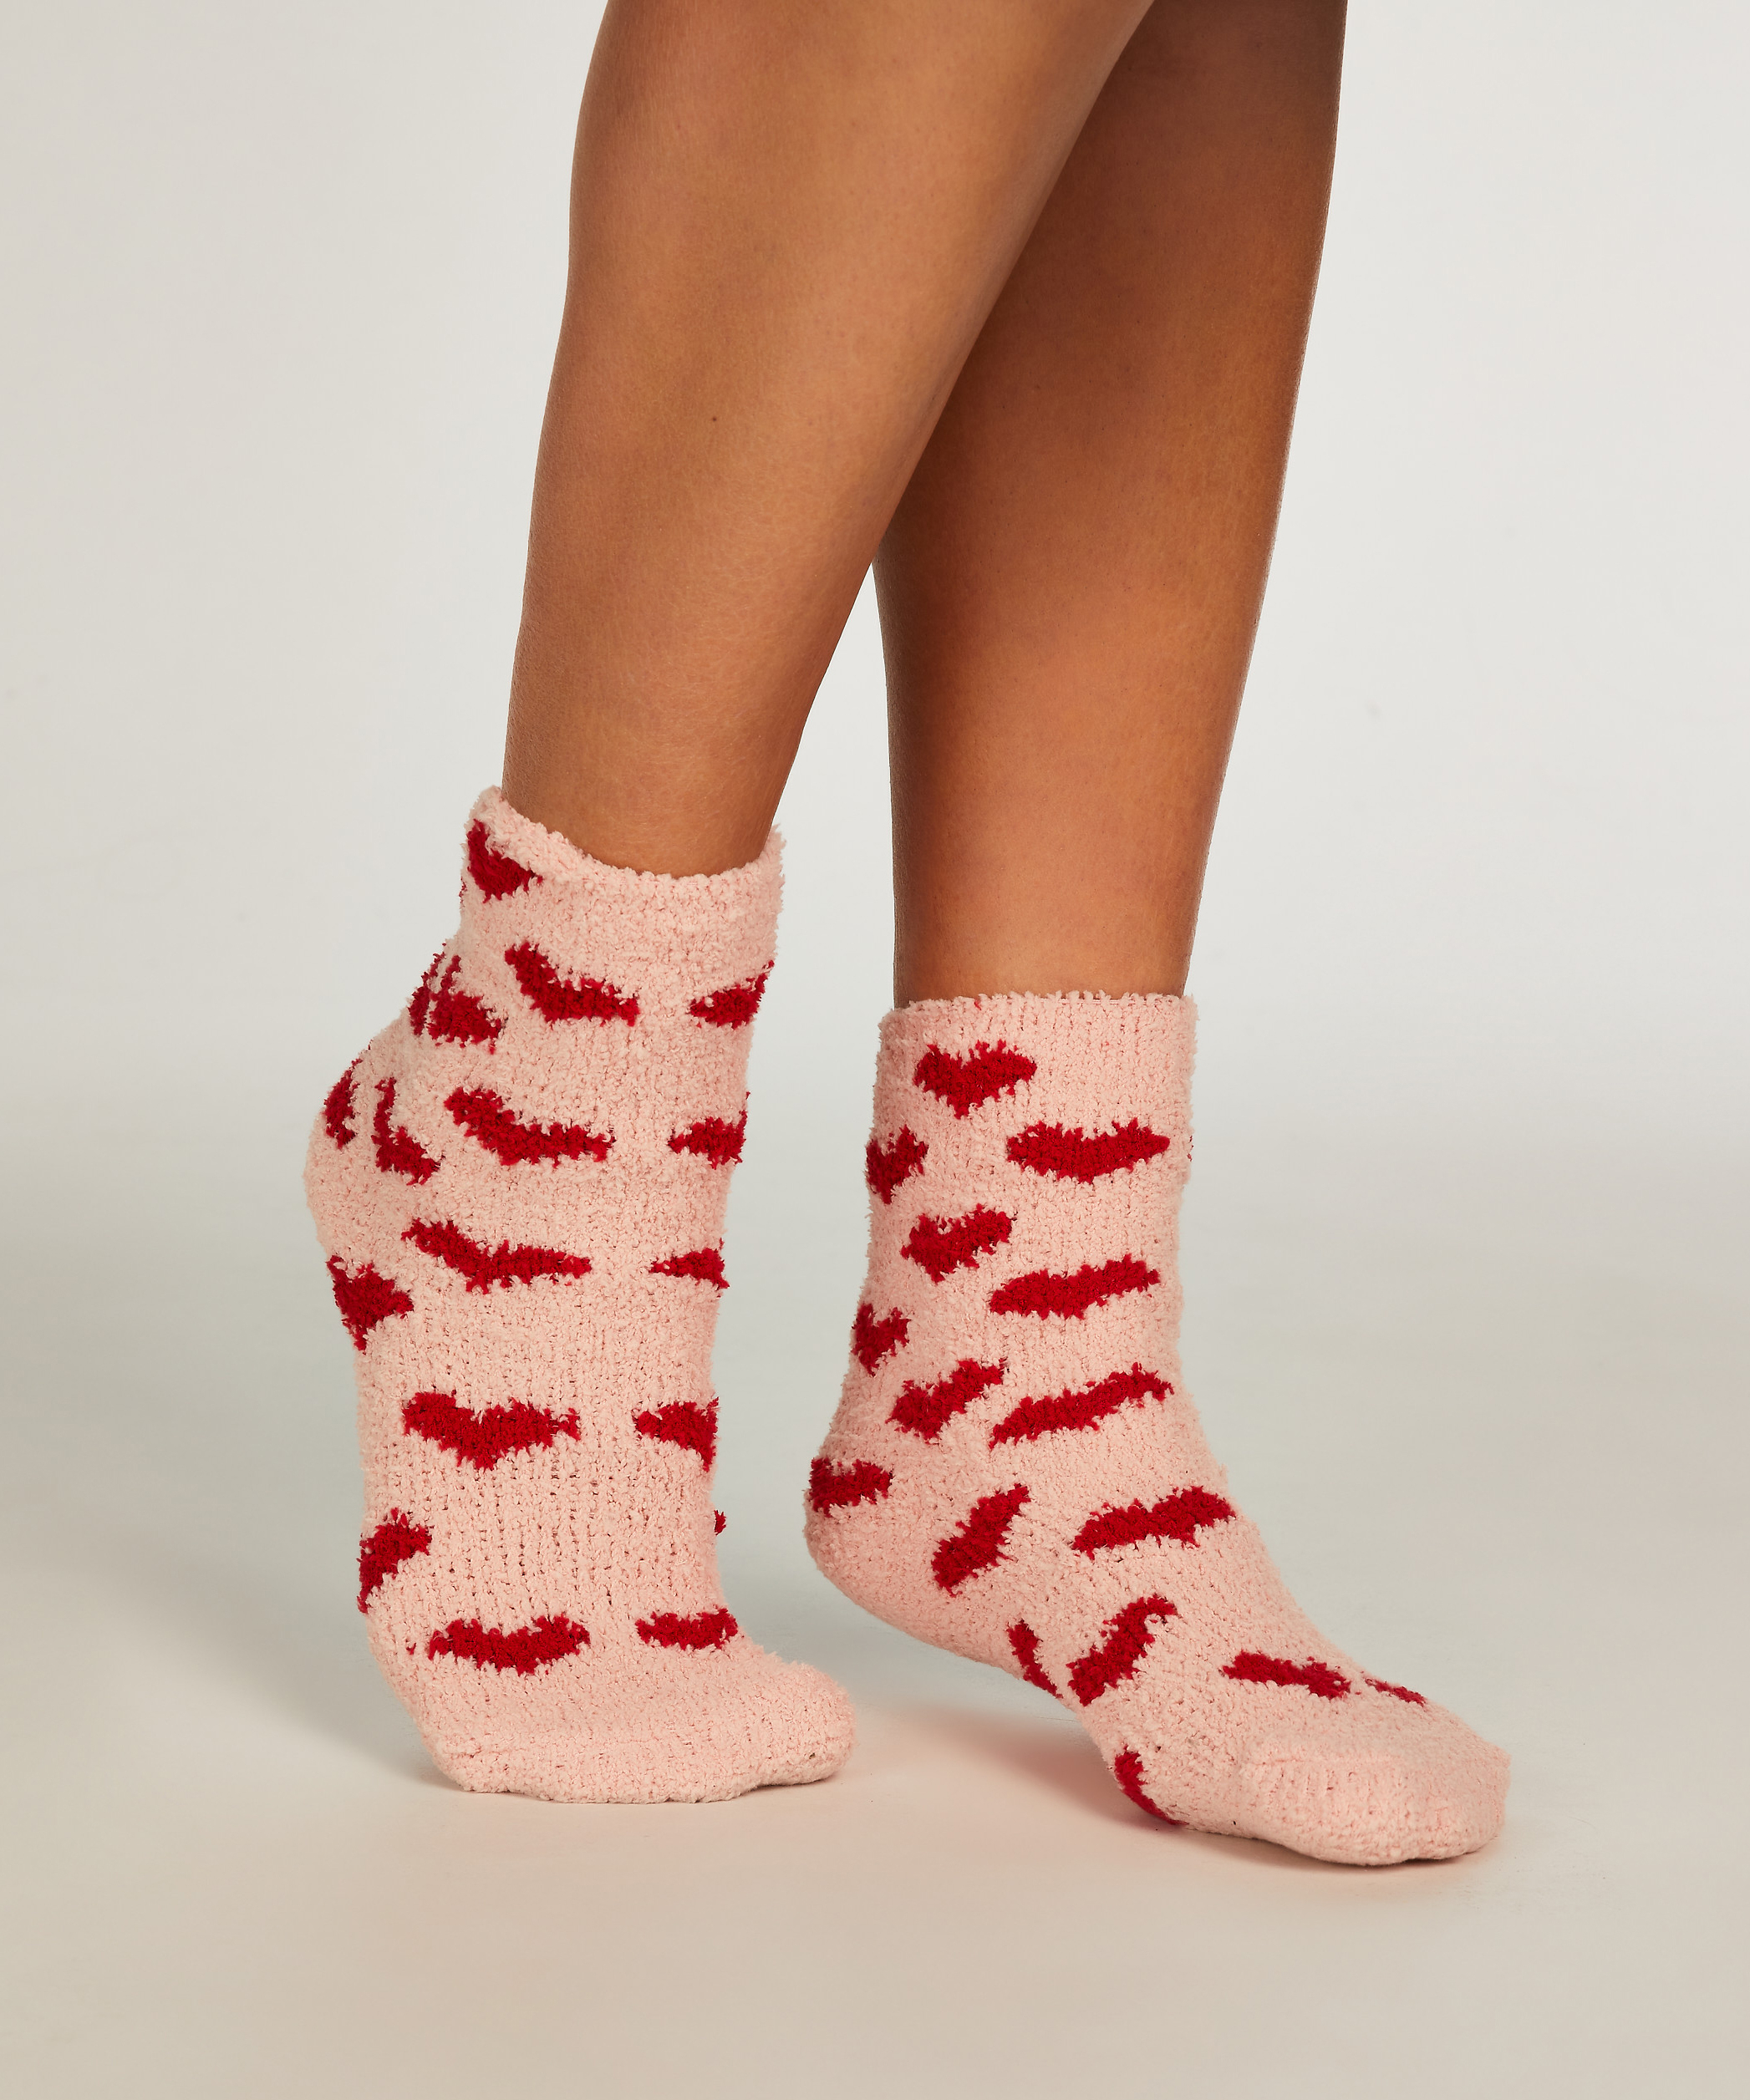 insert I reckon labyrinth 2 Pairs Cosy Socks for €3 - Multi-pack Collection - Hunkemöller